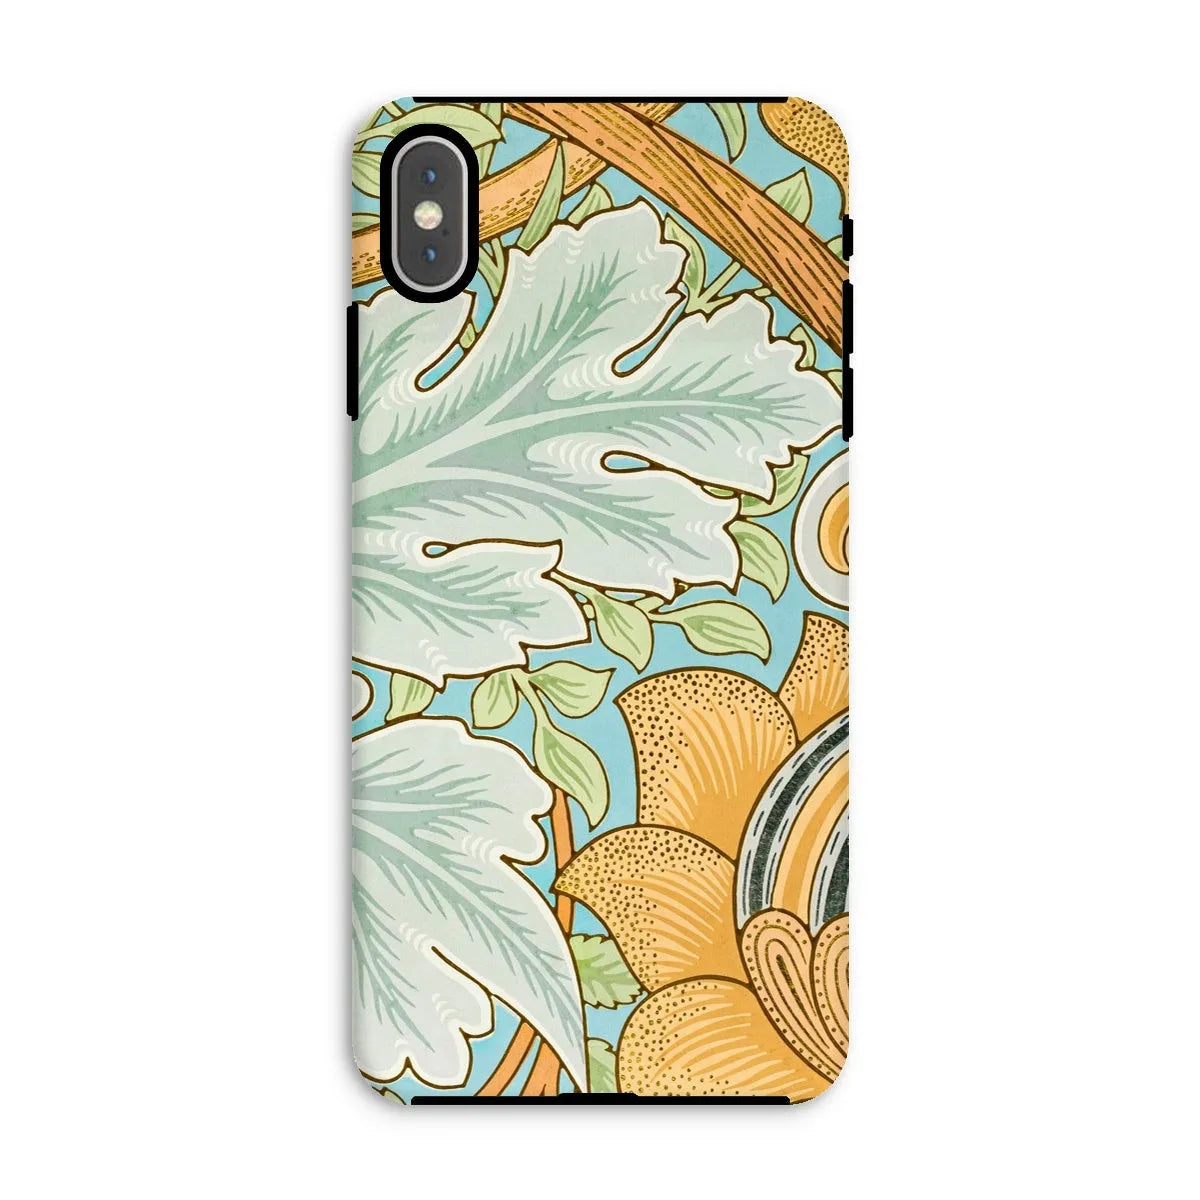 St. James - Arts And Crafts Phone Case - William Morris - Iphone Xs Max / Matte - Mobile Phone Cases - Aesthetic Art